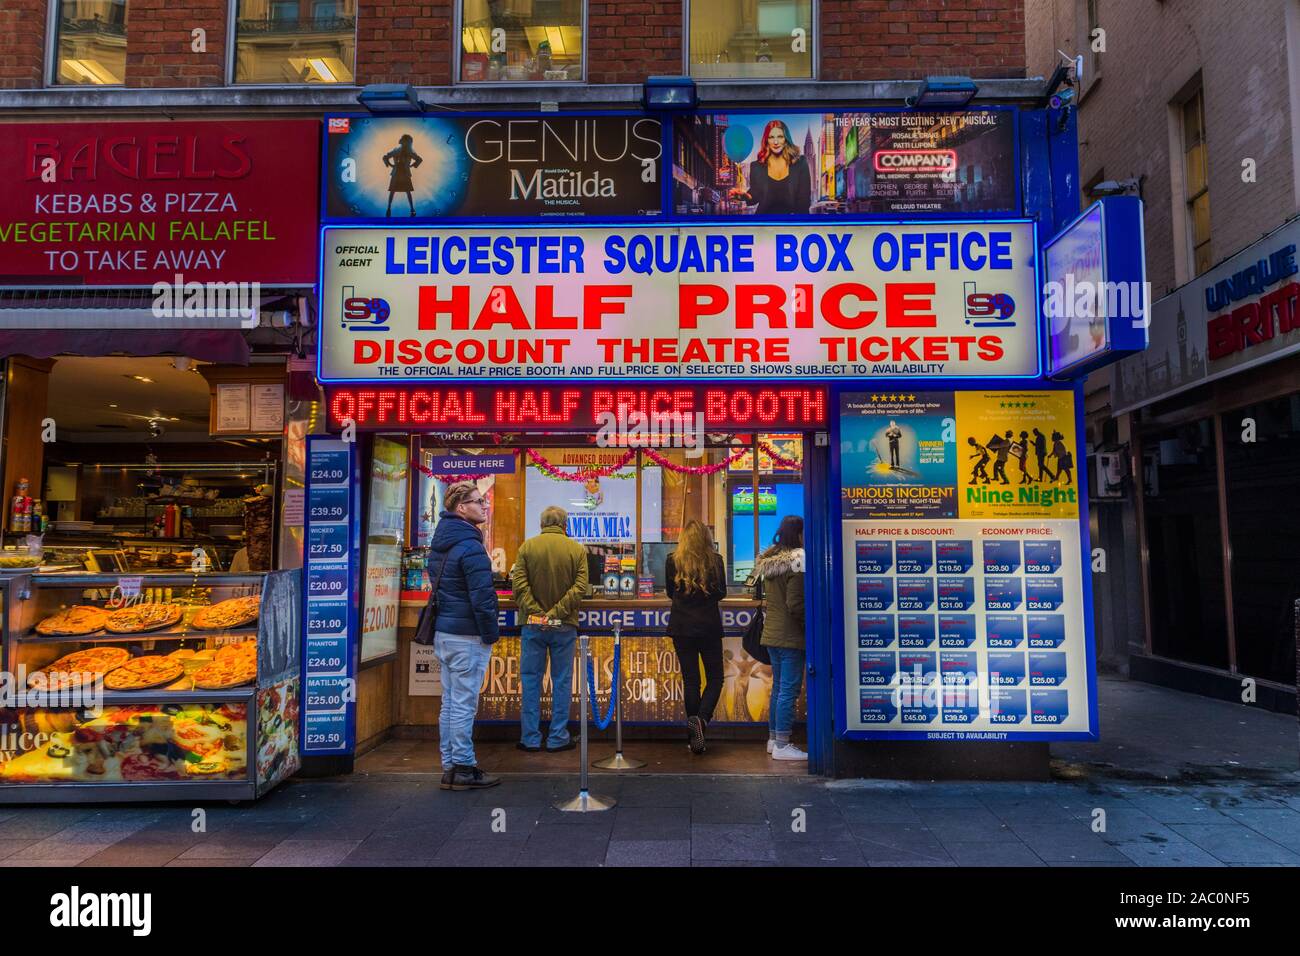 Discount Theatre tickets being offered for sale in the Leicester Square Box Office West End London Stock Photo